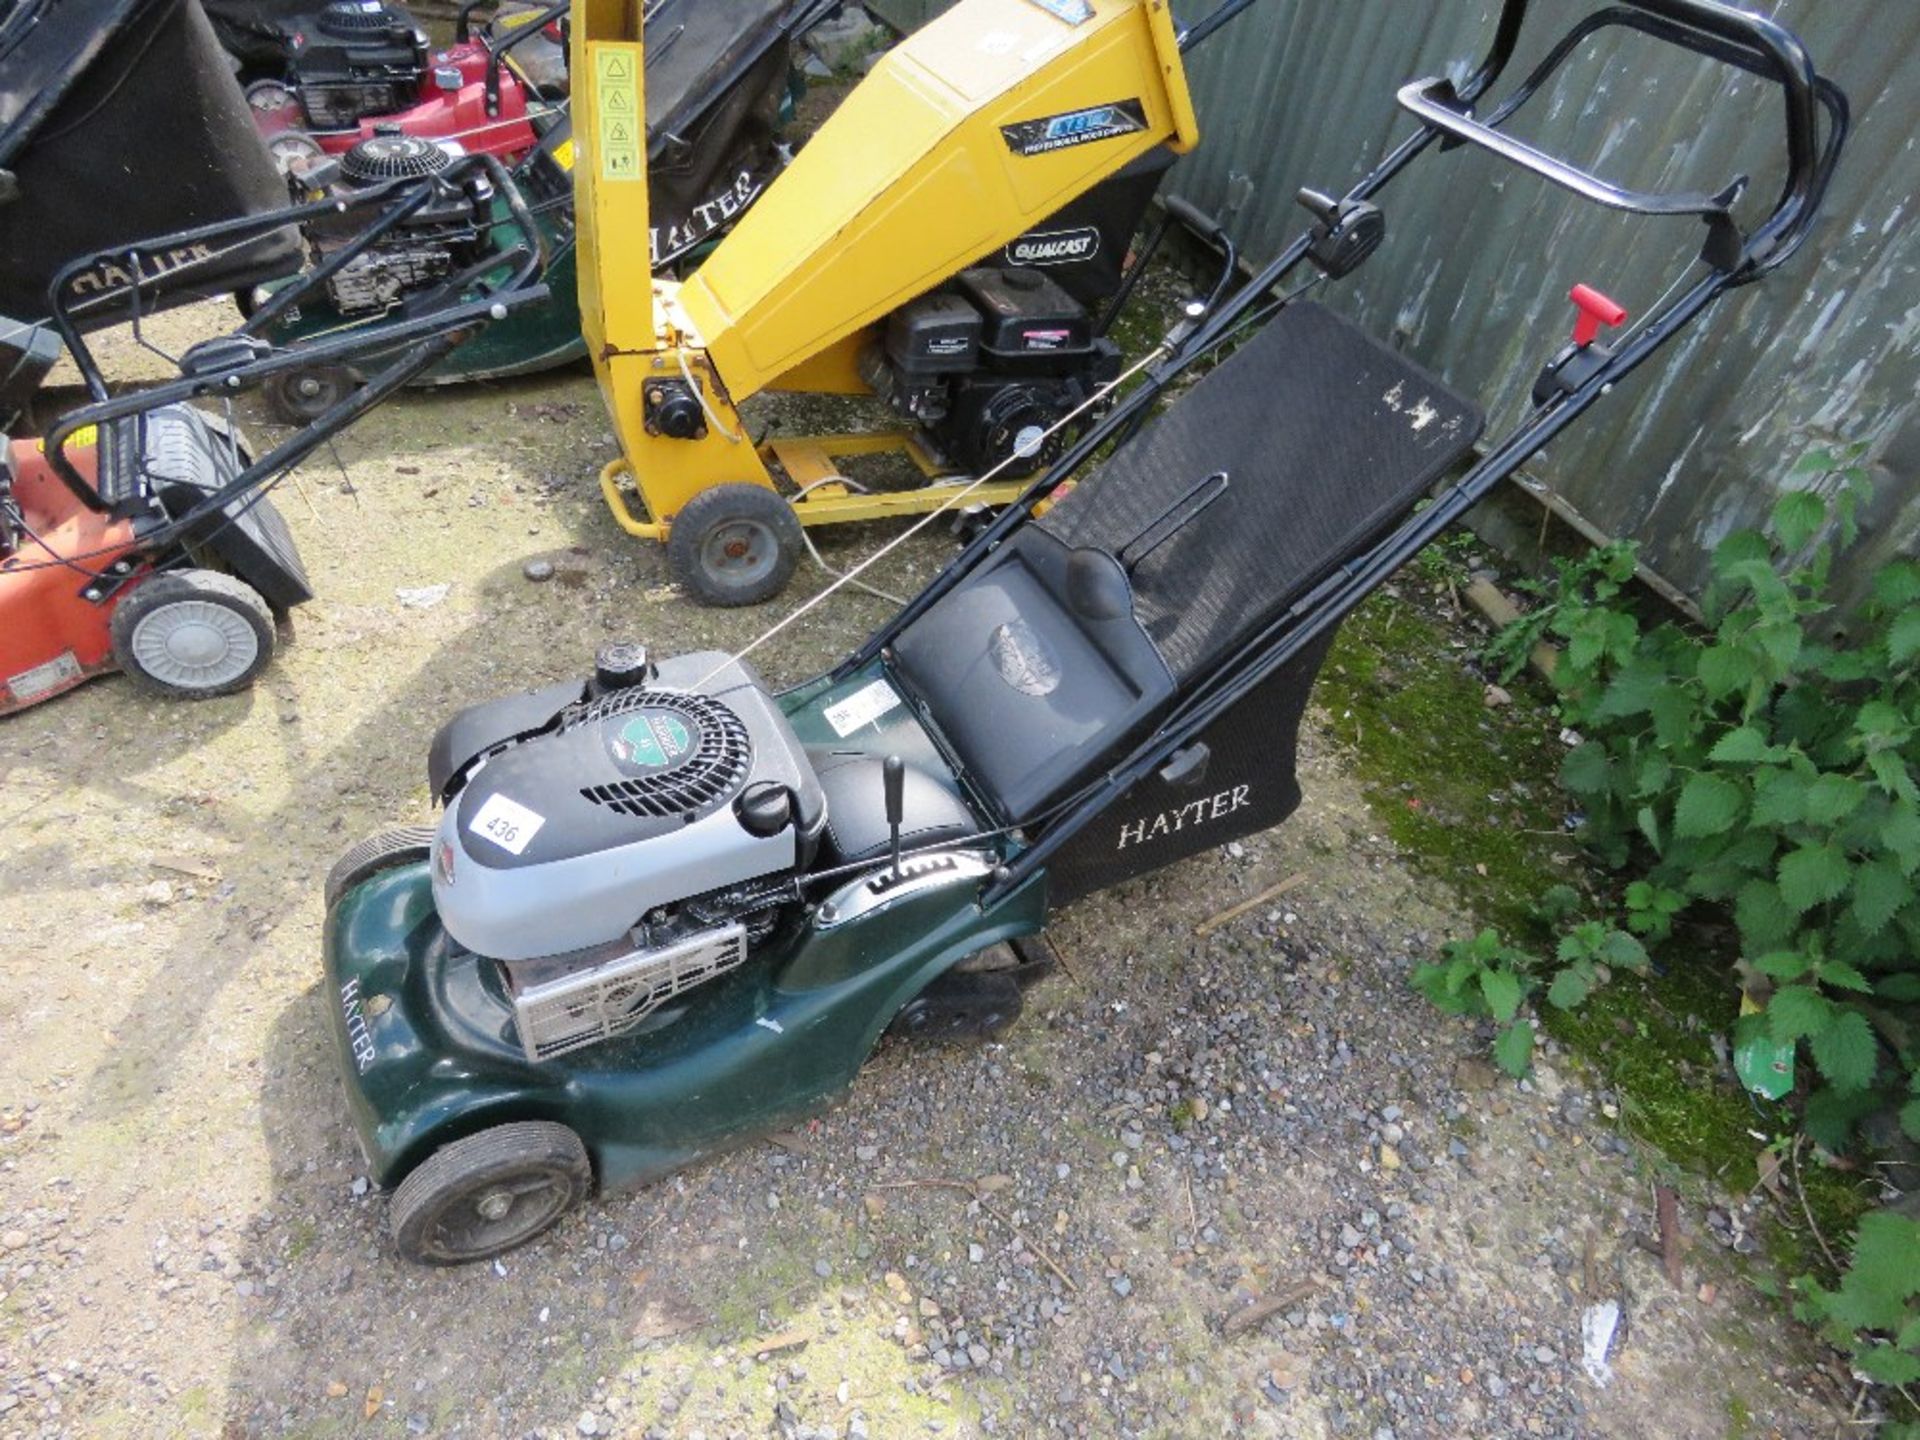 HAYTER HARRIER 41 ROLLER MOWER WITH COLLECTOR. SEEN RUNNING BUT NO DRIVE?? ....THIS LOT IS SOLD UNDE - Image 2 of 4